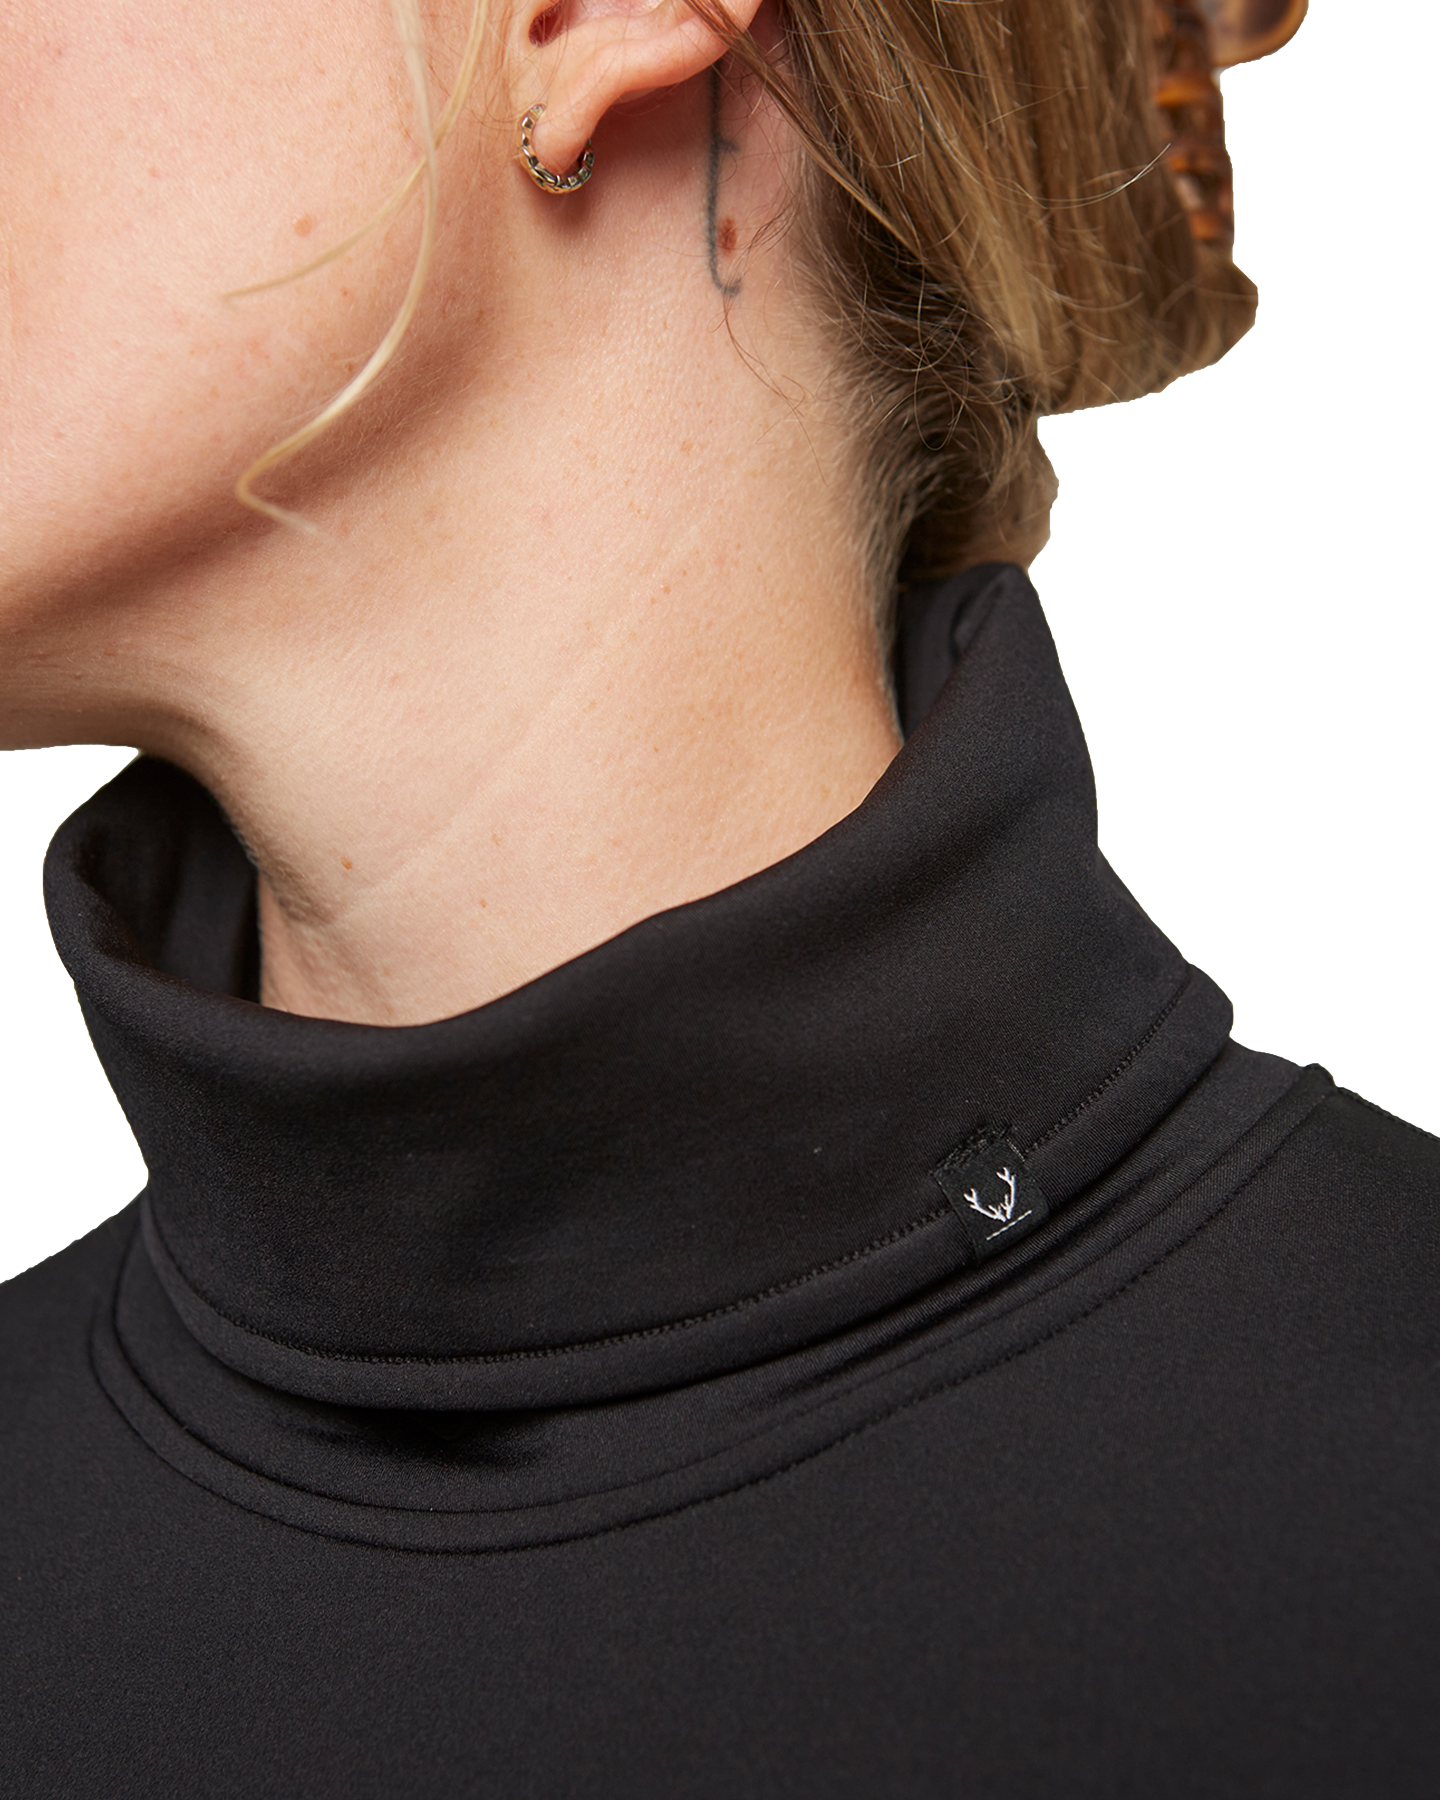 Rojo Park Life Funnel Neck Women's Thermal Top Women's Thermals - SnowSkiersWarehouse